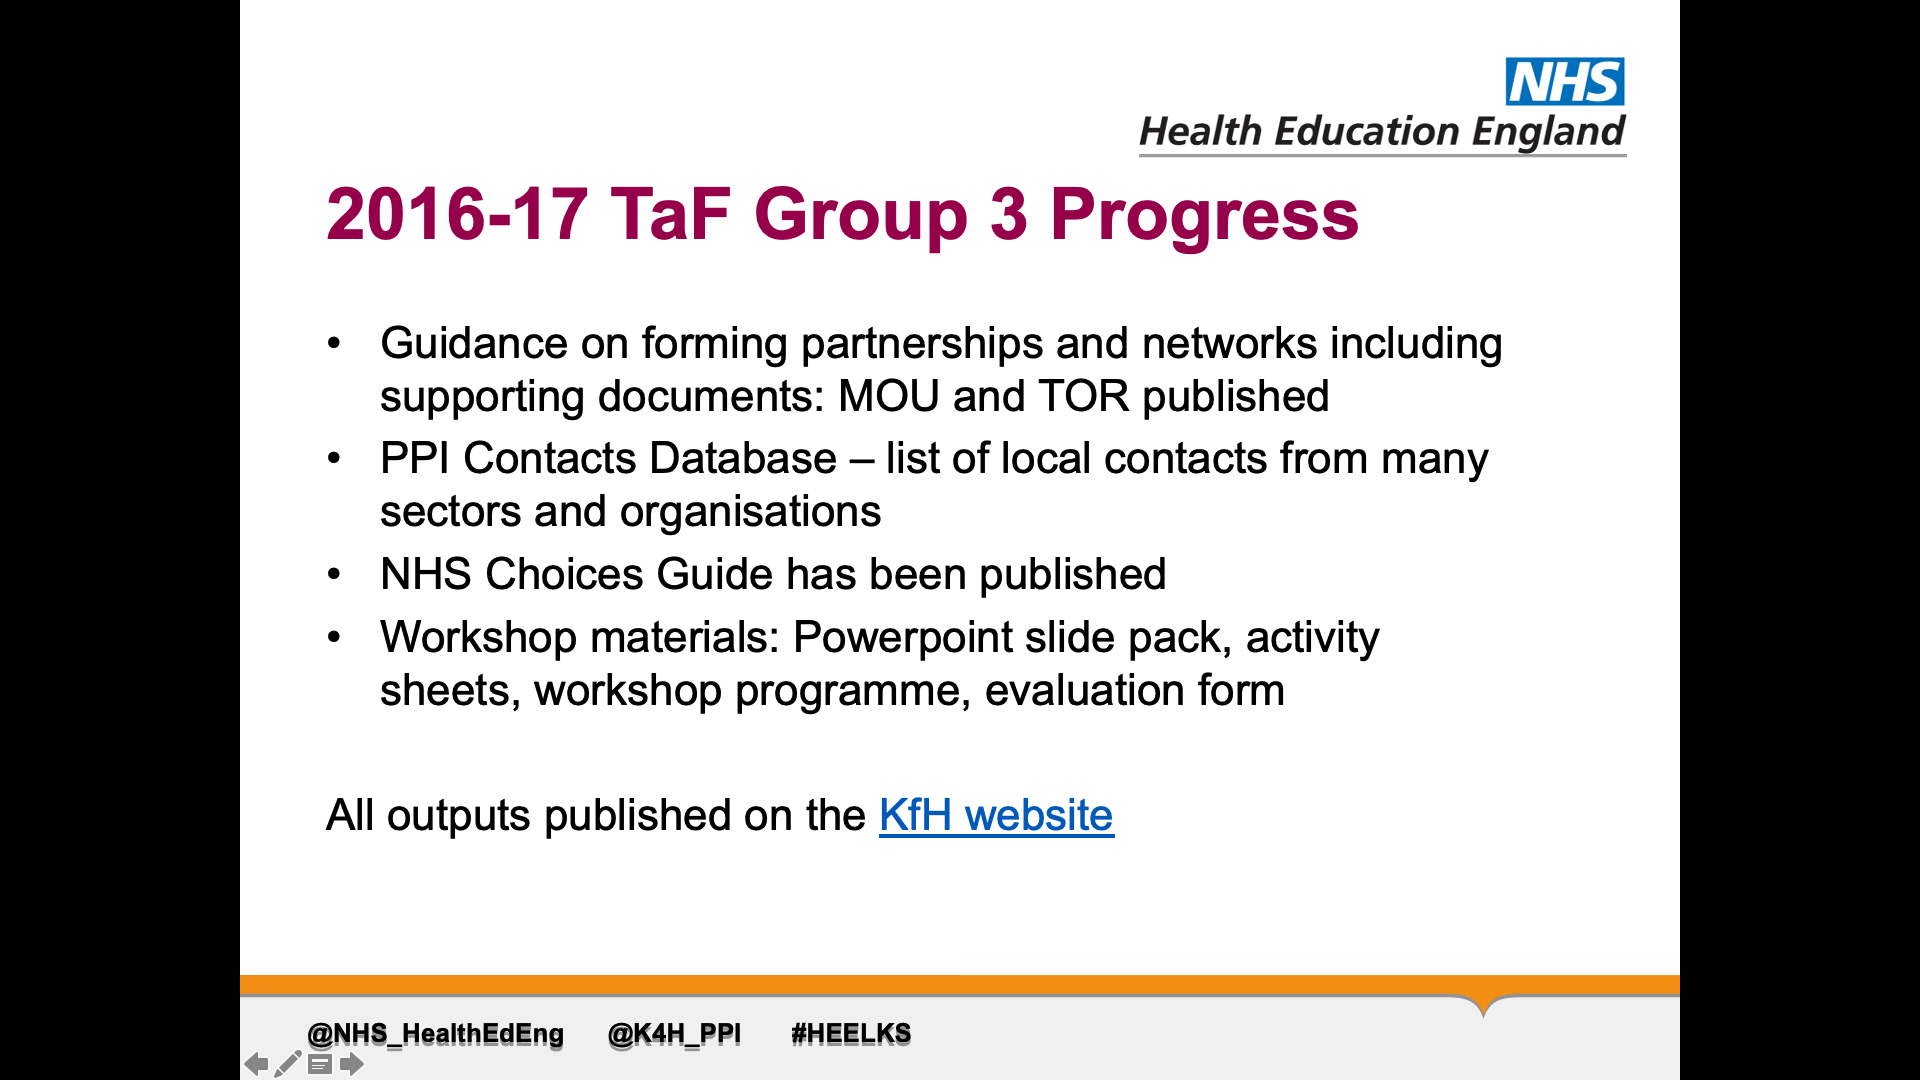 Title: 2016-17 TaF Group 3 Progress Text on page: Guidance on forming partnerships and networks including supporting documents: MOU and TOR published PPI Contacts Database – list of local contacts from many sectors and organisations  NHS Choices Guide has been published Workshop materials: Powerpoint slide pack, activity sheets, workshop programme, evaluation form  All outputs published on the KfH website